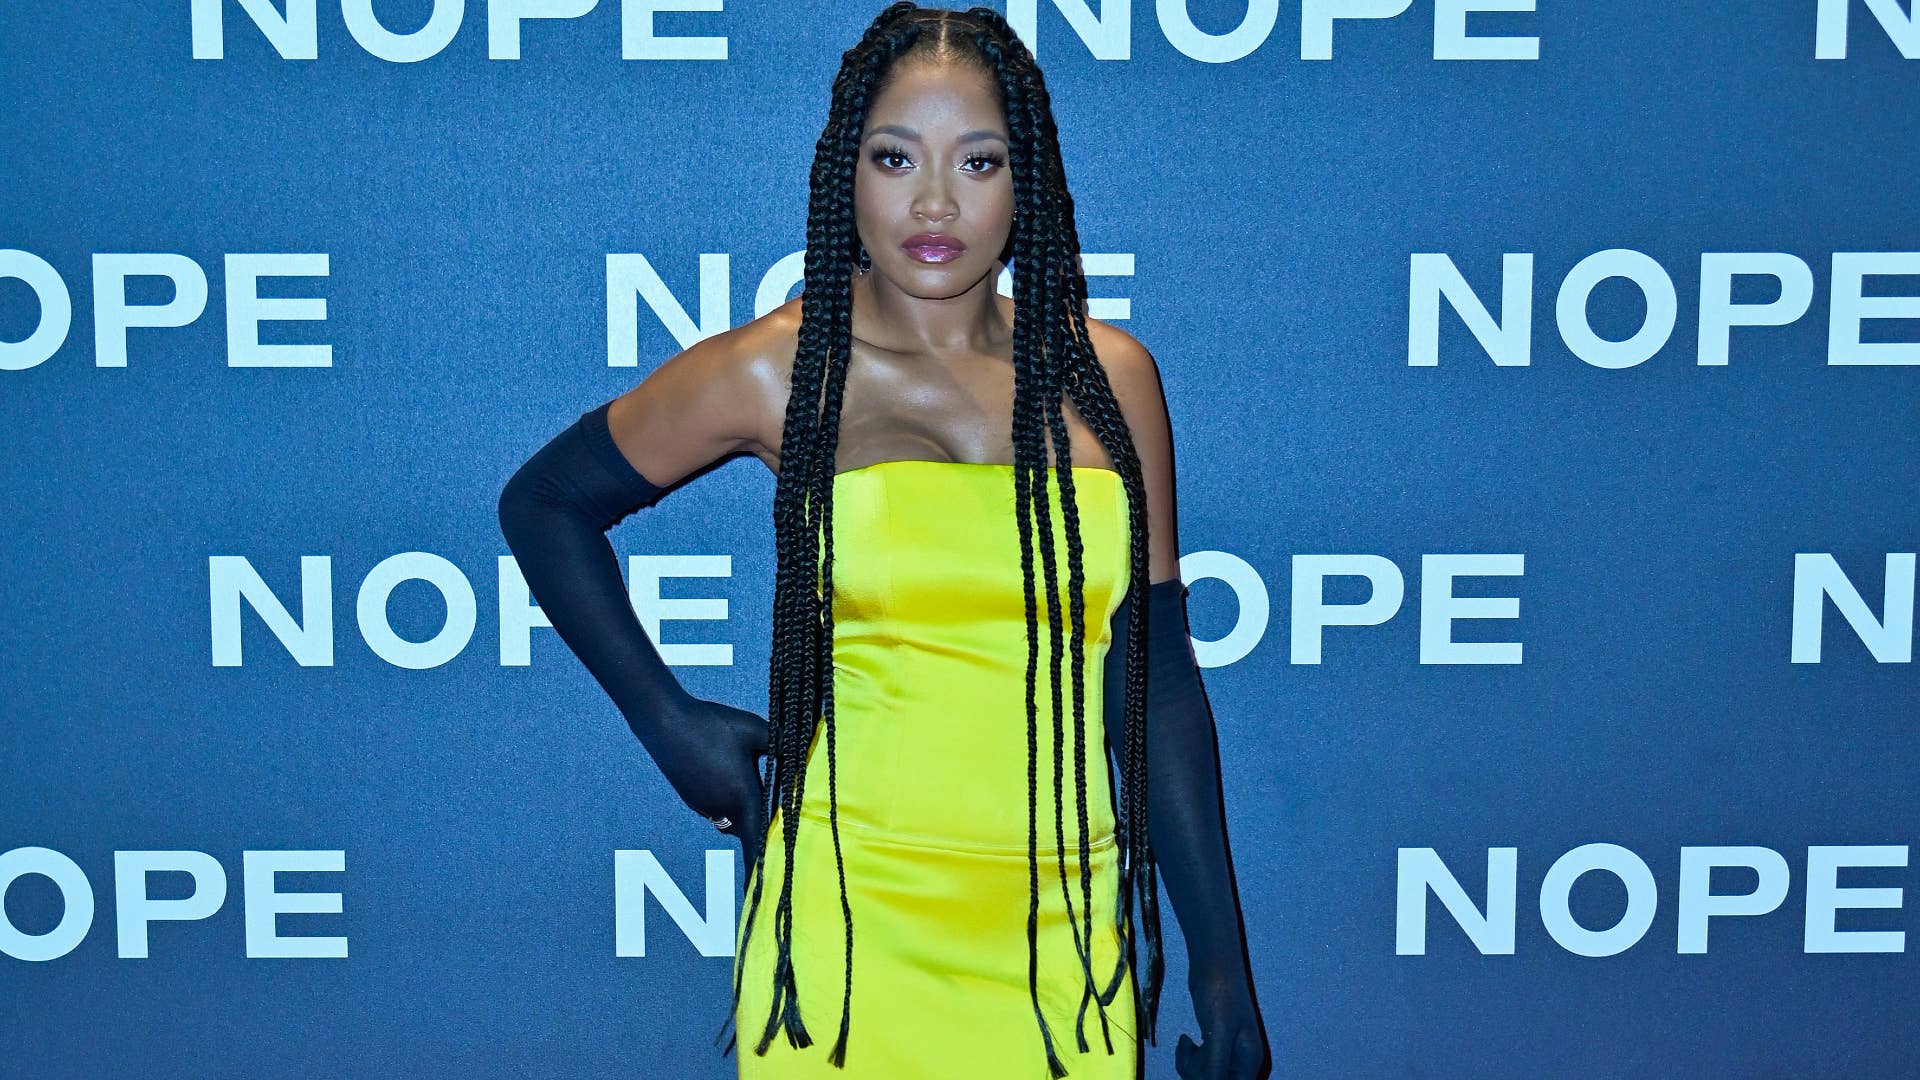 Keke Palmer is pictured on the Nope red carpet